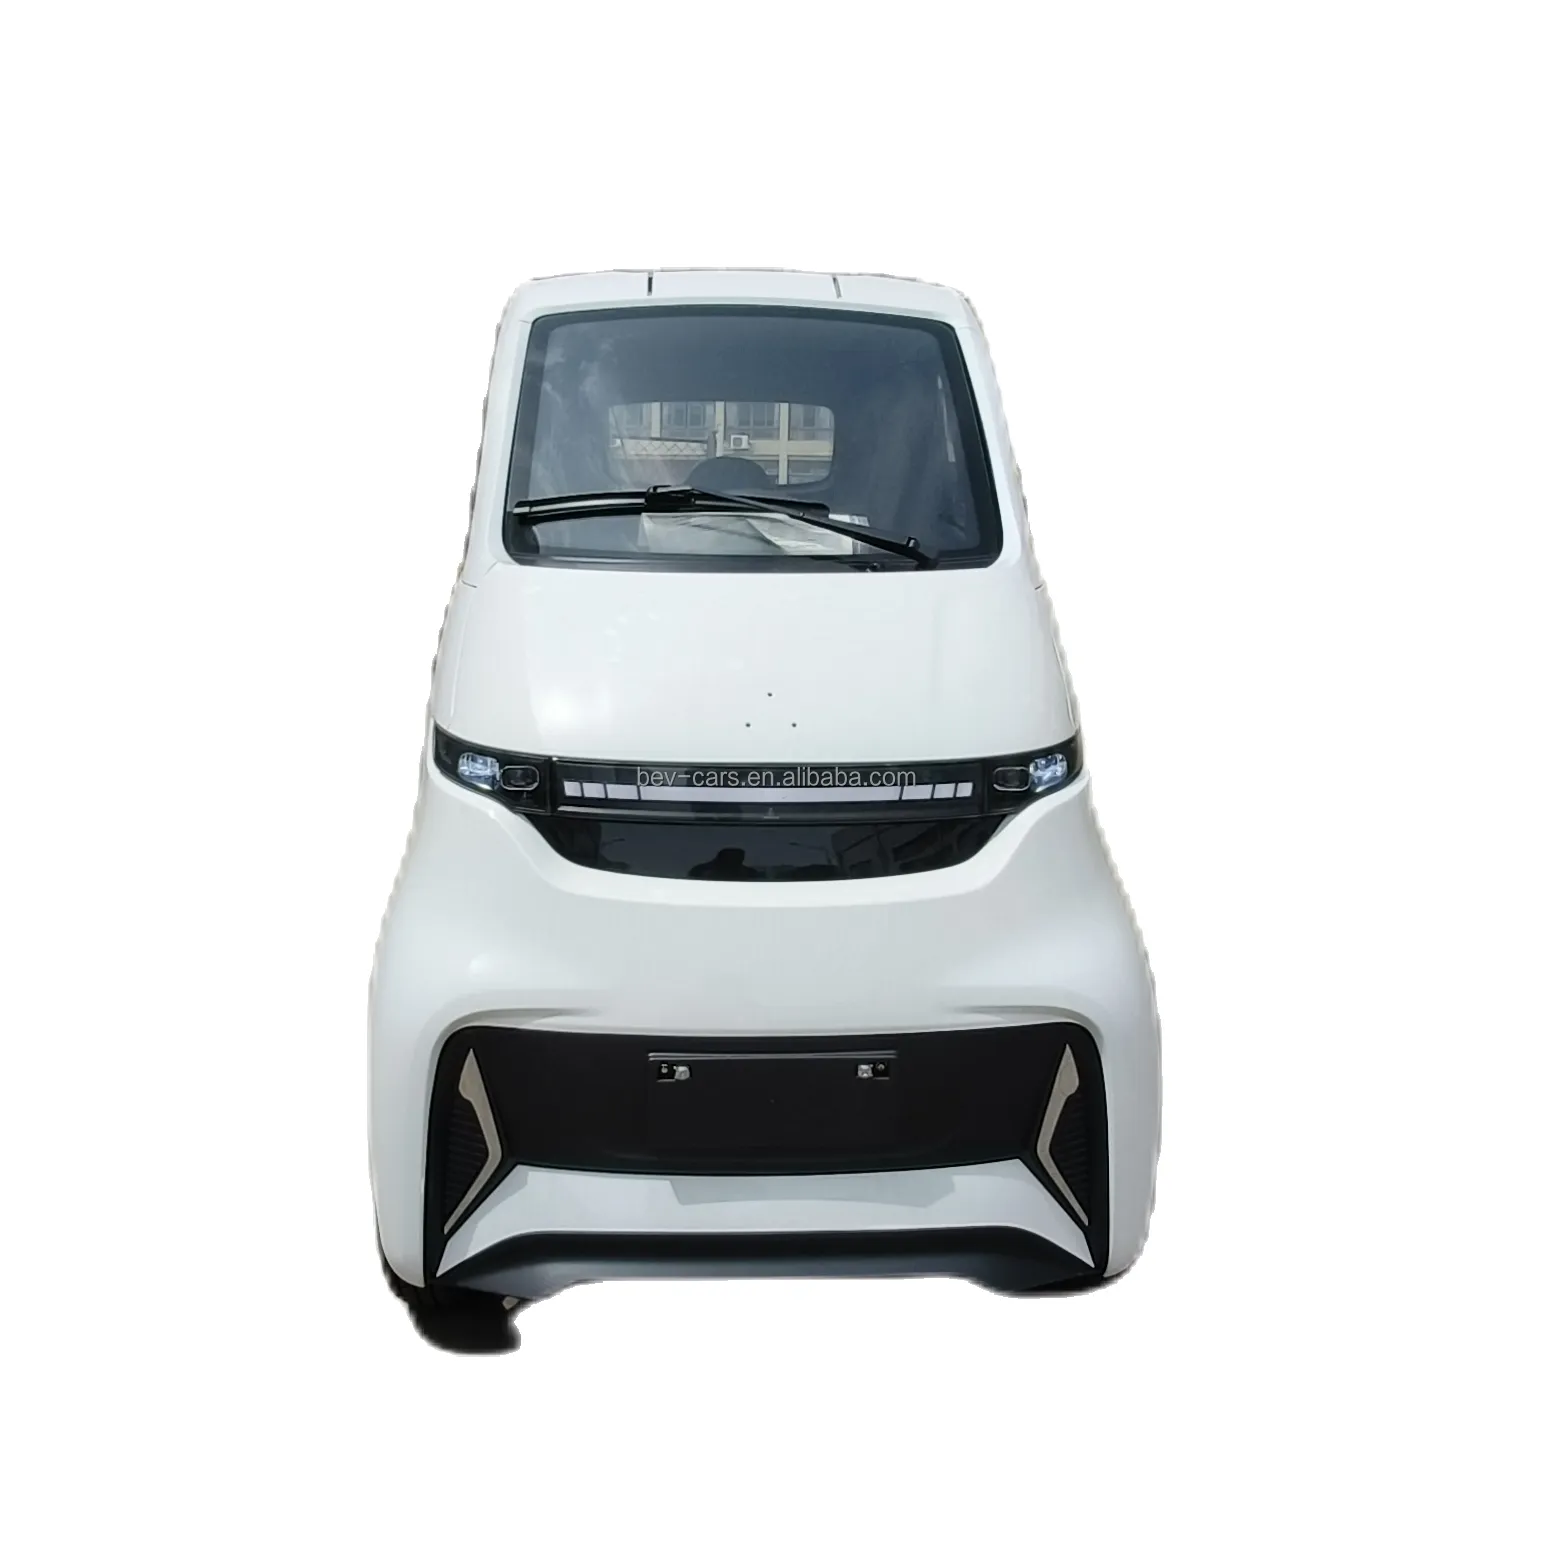 New electric car 4 wheels electric vehicle approved eec l6e hot sale electric vehicles car for adults